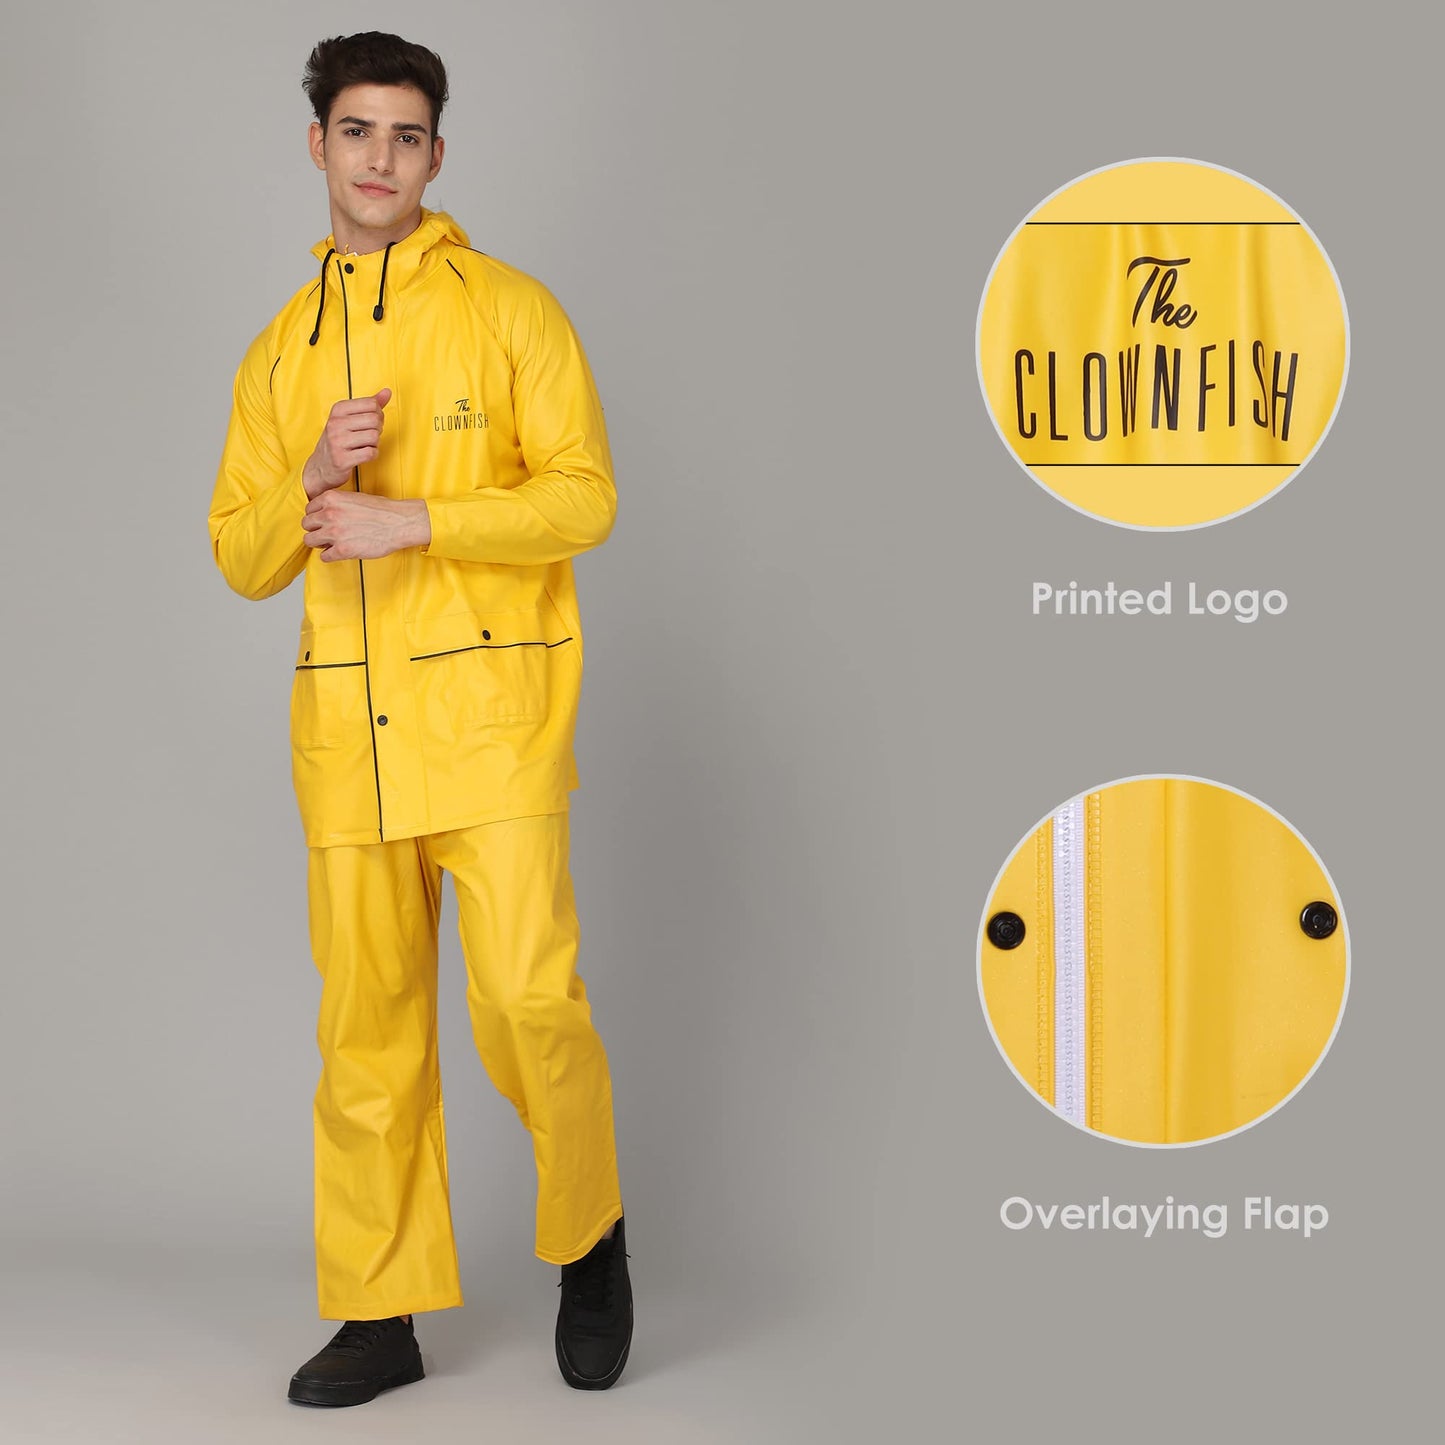 THE CLOWNFISH Rain Coat for Men Waterproof for Bike Reversible Double Layer with Hood Raincoat for Men. Set of Top and Bottom Packed in a Storage Bag Opener Pro Series (Black, XXX-Large)